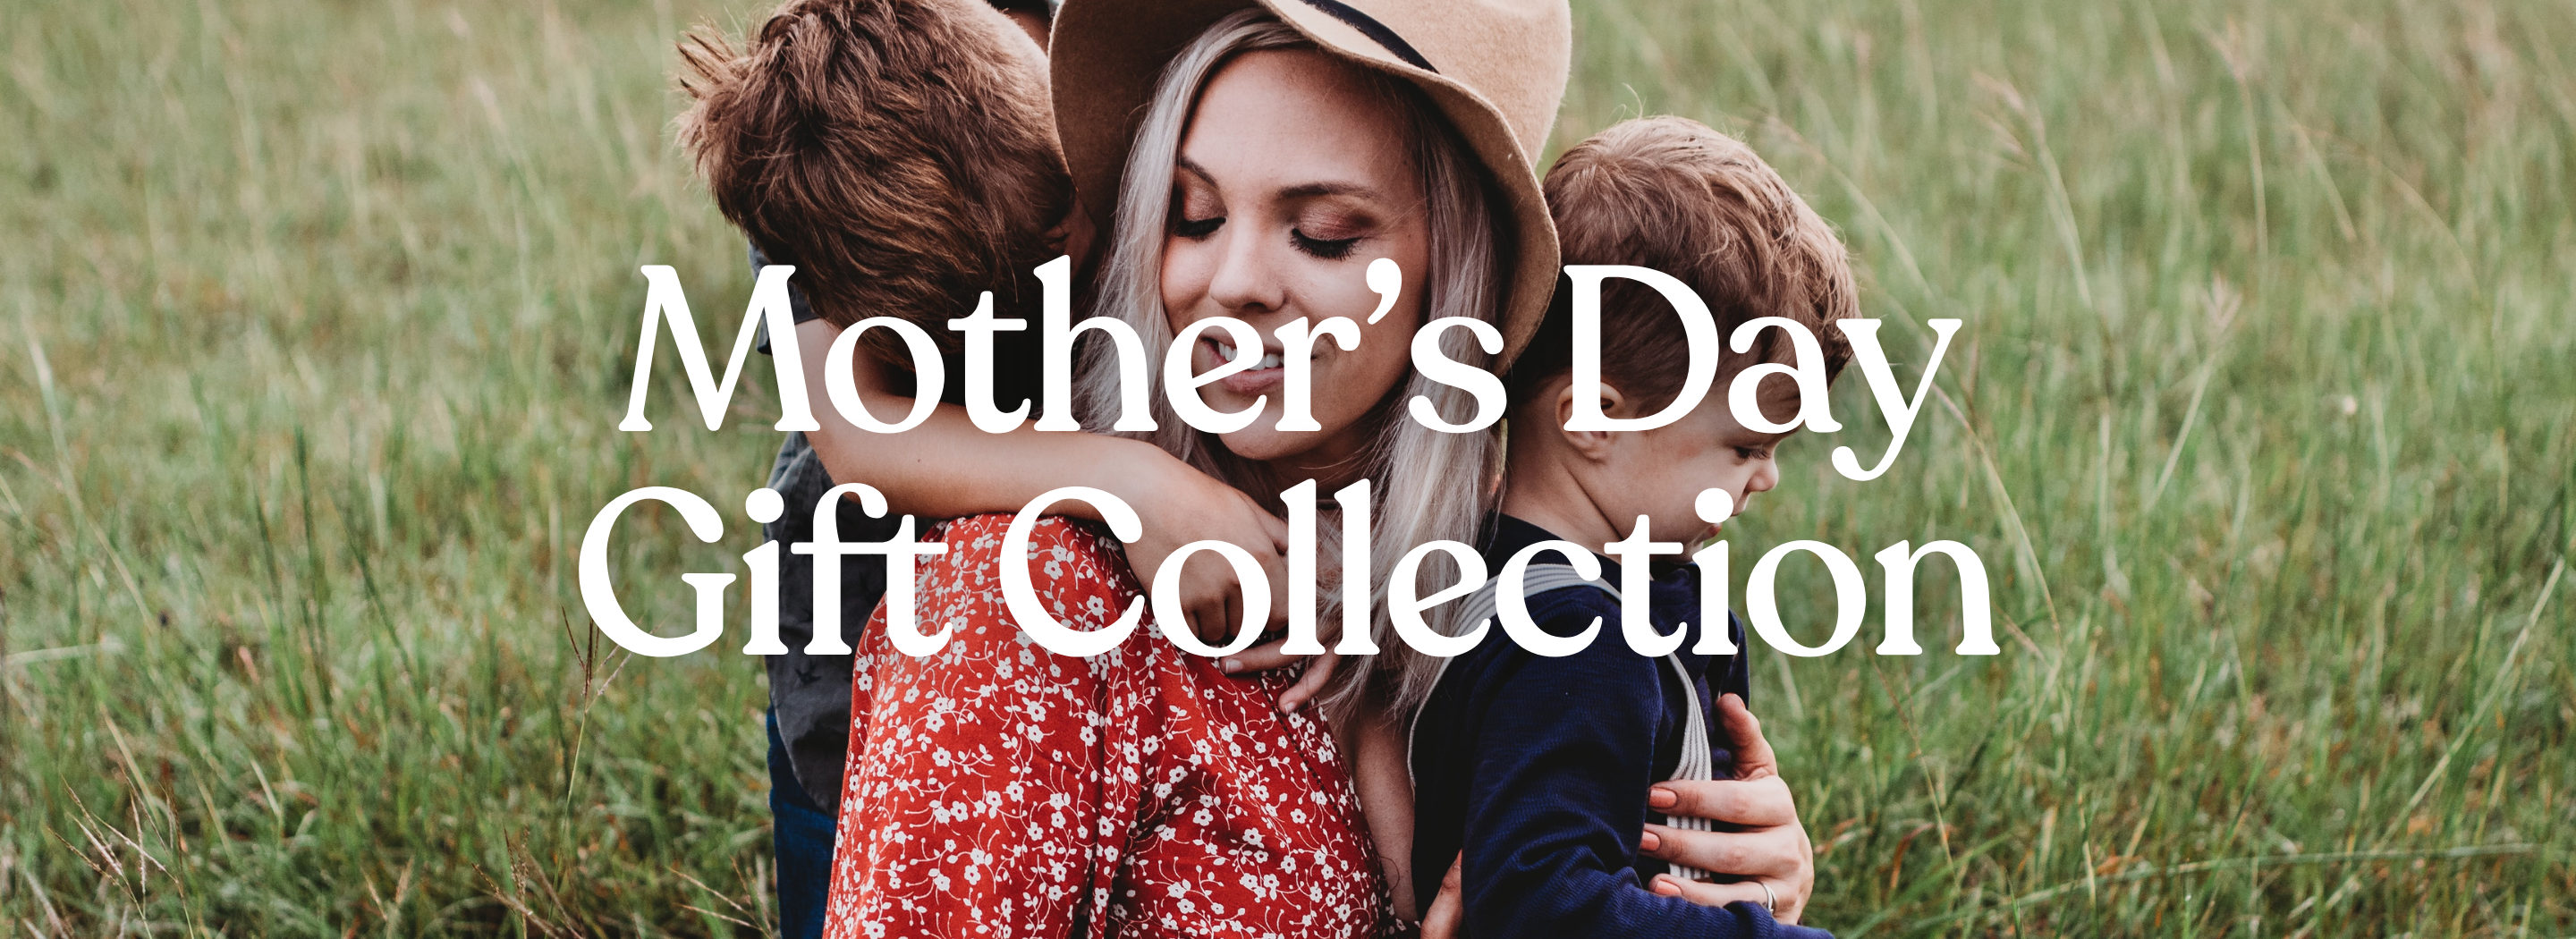 Mother's Day Gift Collection caption. A mother hold two children on a field